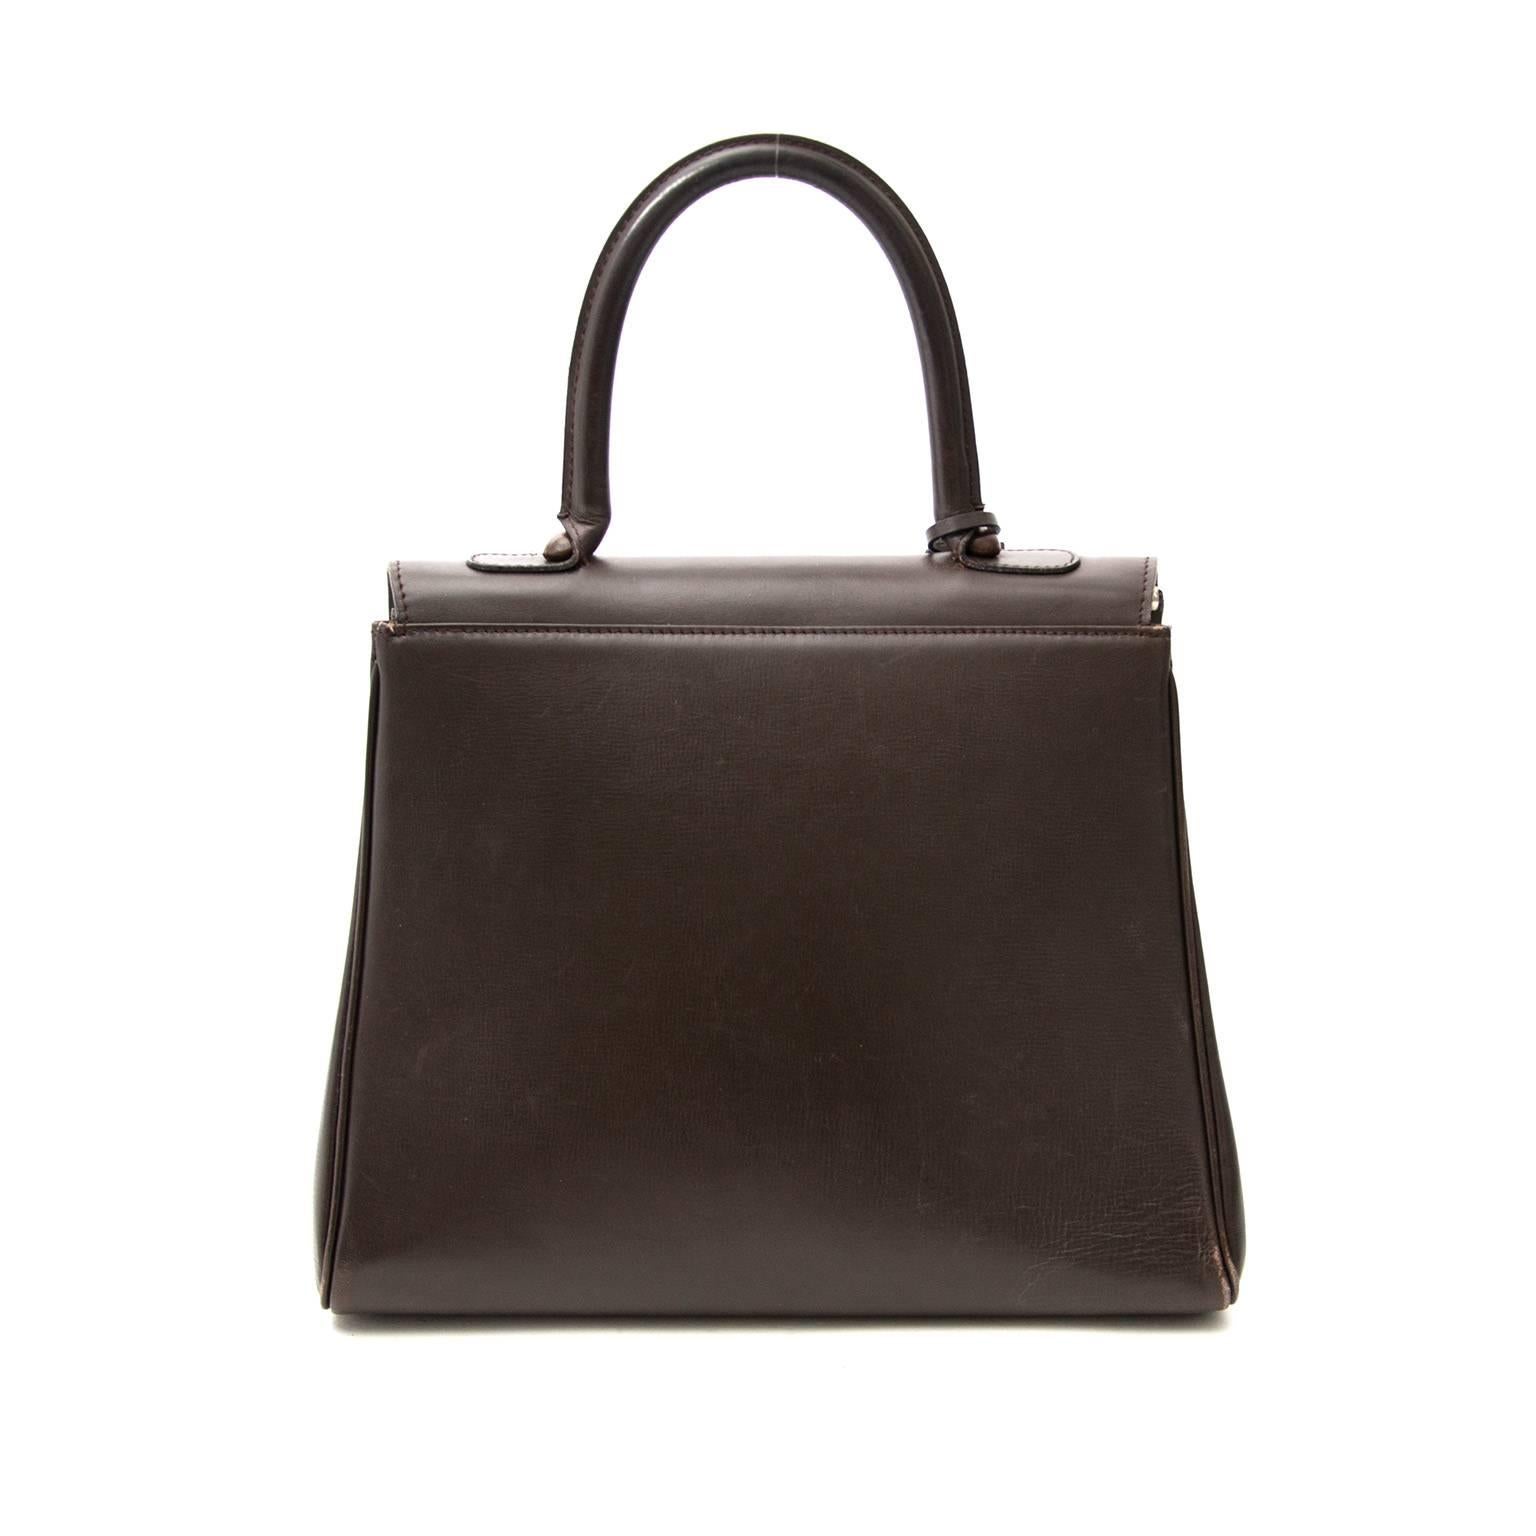 Vintage Delvaux Brown Brillant MM

This beautiful icon from the oldest fine leather luxury house in the world is a true must-have.

The smooth brown leather compliments beautifully with the silver buckle. Fully lined suede interior.